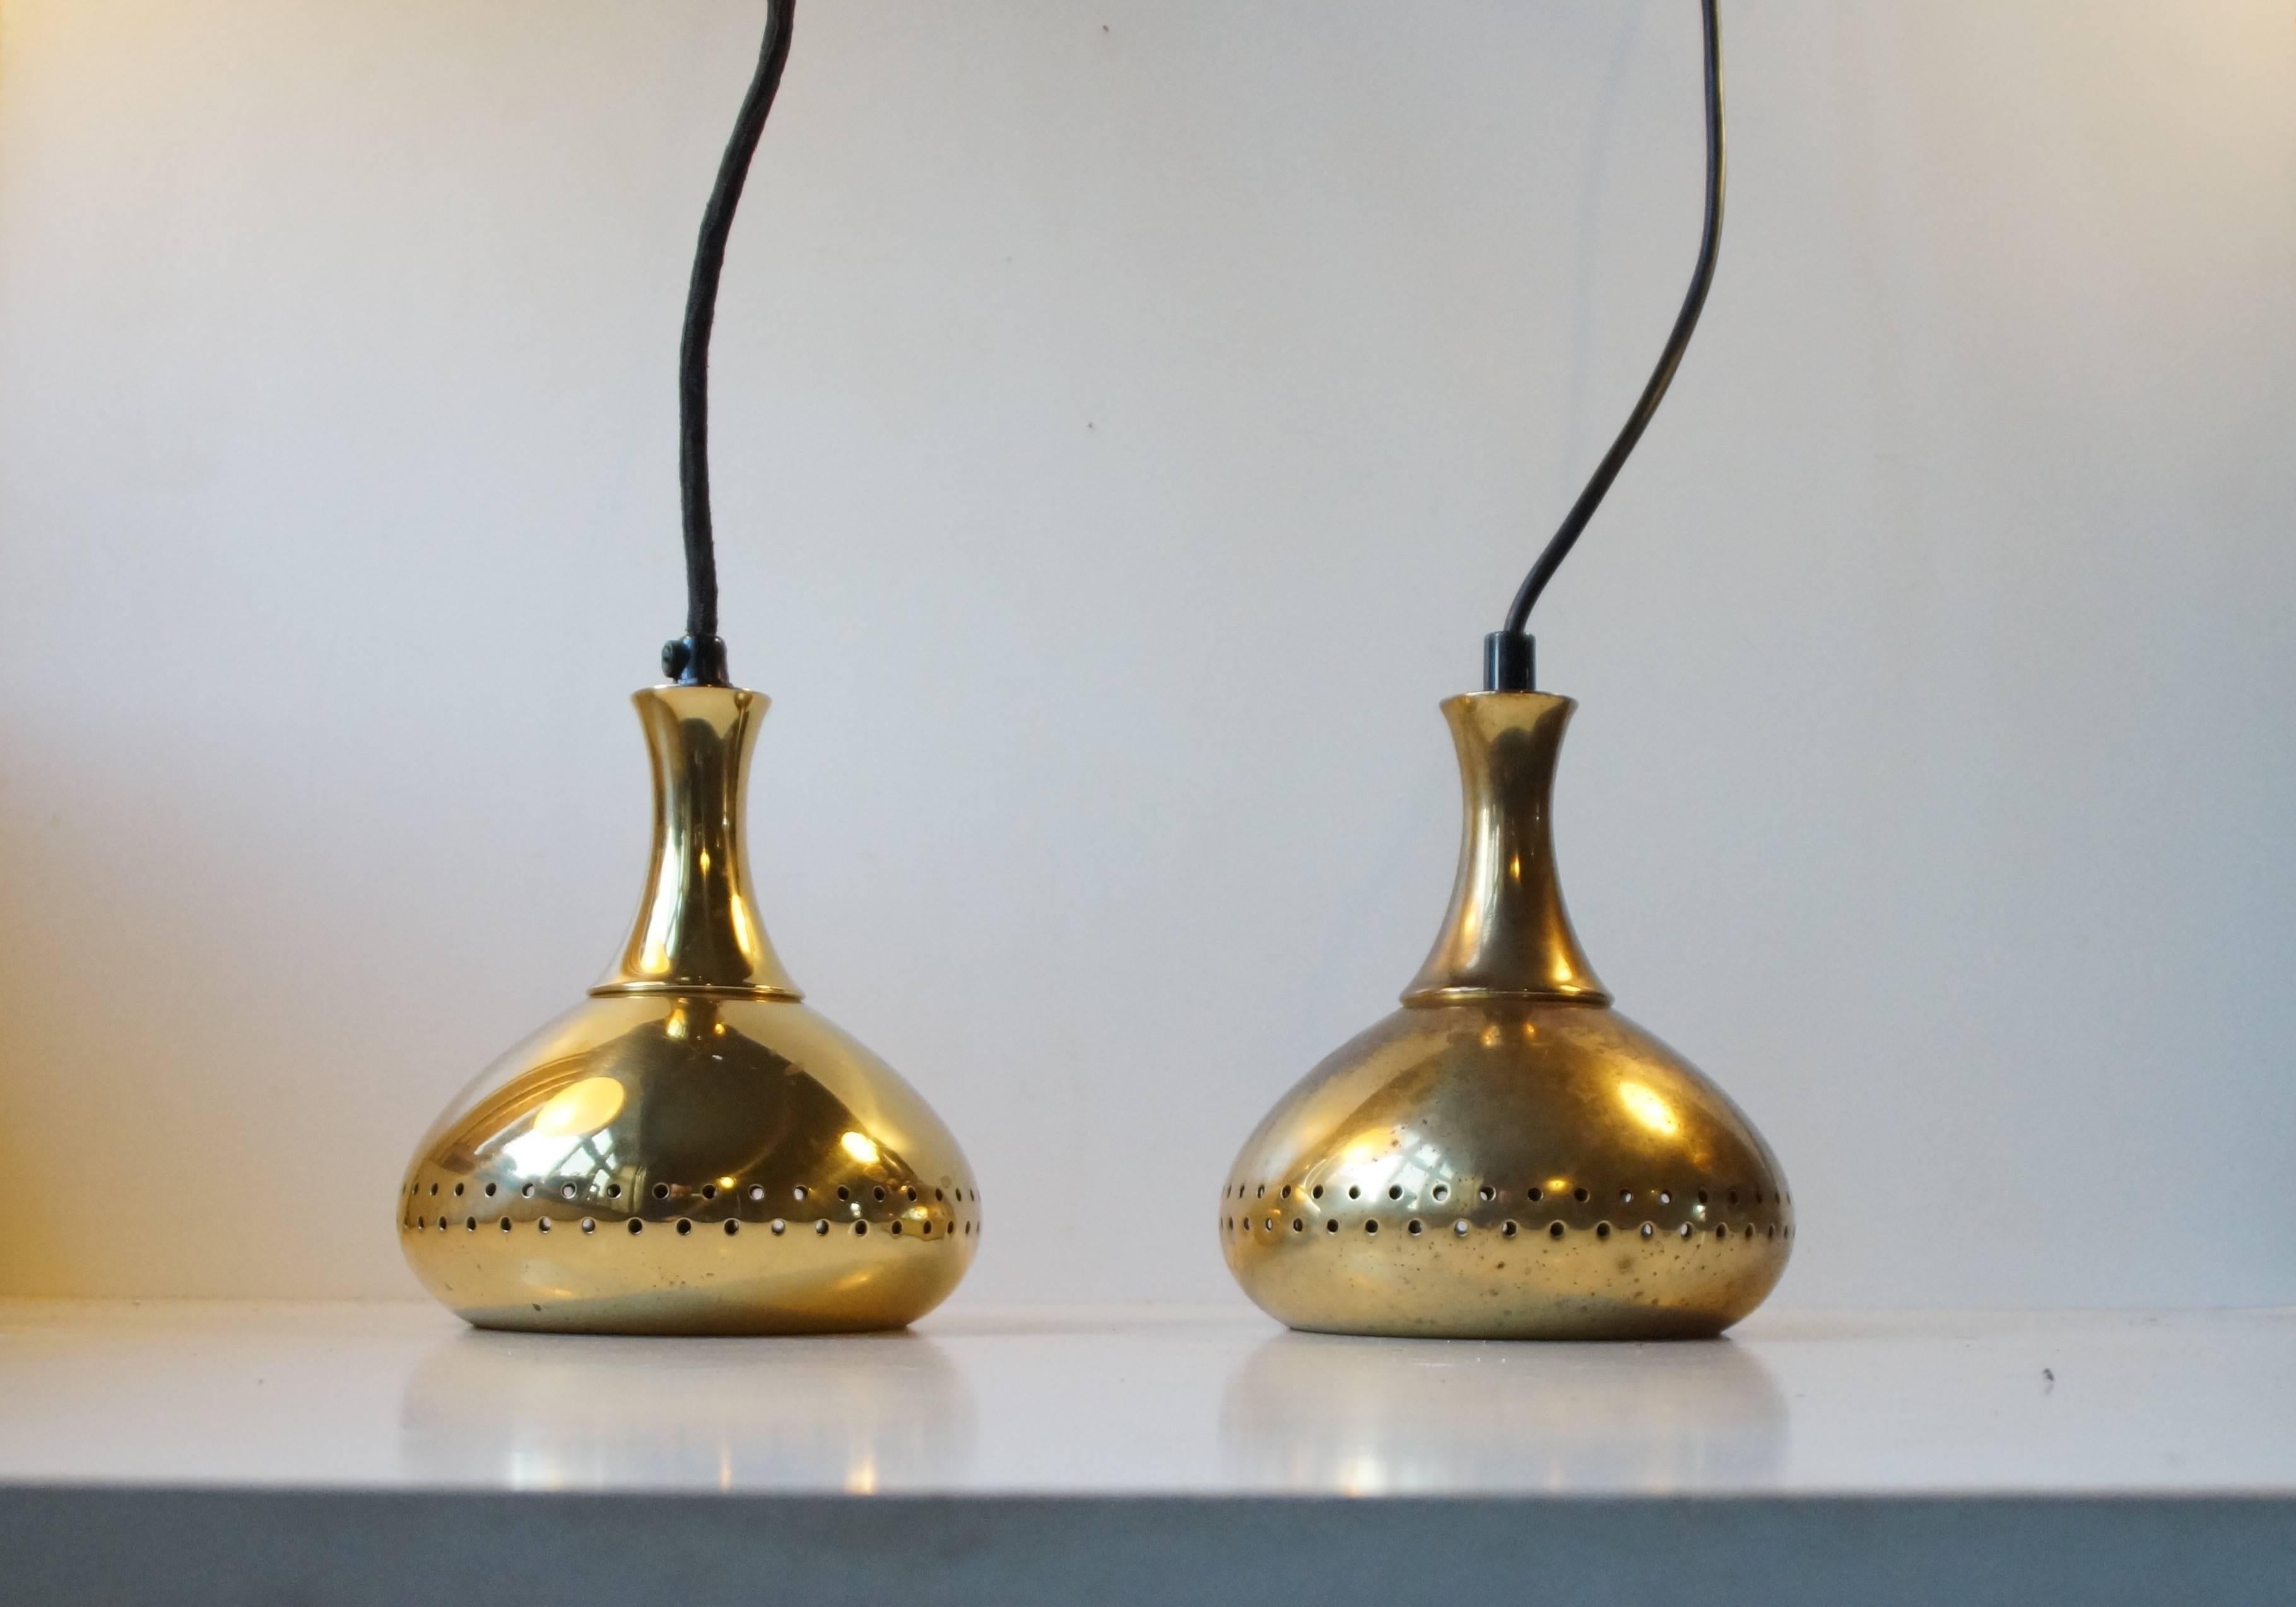 A pair of small pendants in partially perforated brass designed by Hans-Agne Jakobsson and manufactured by Markaryd AB in Sweden during the 1950s. Very nice vintage condition - one slightly more patinated than the other. The lamps comes with new